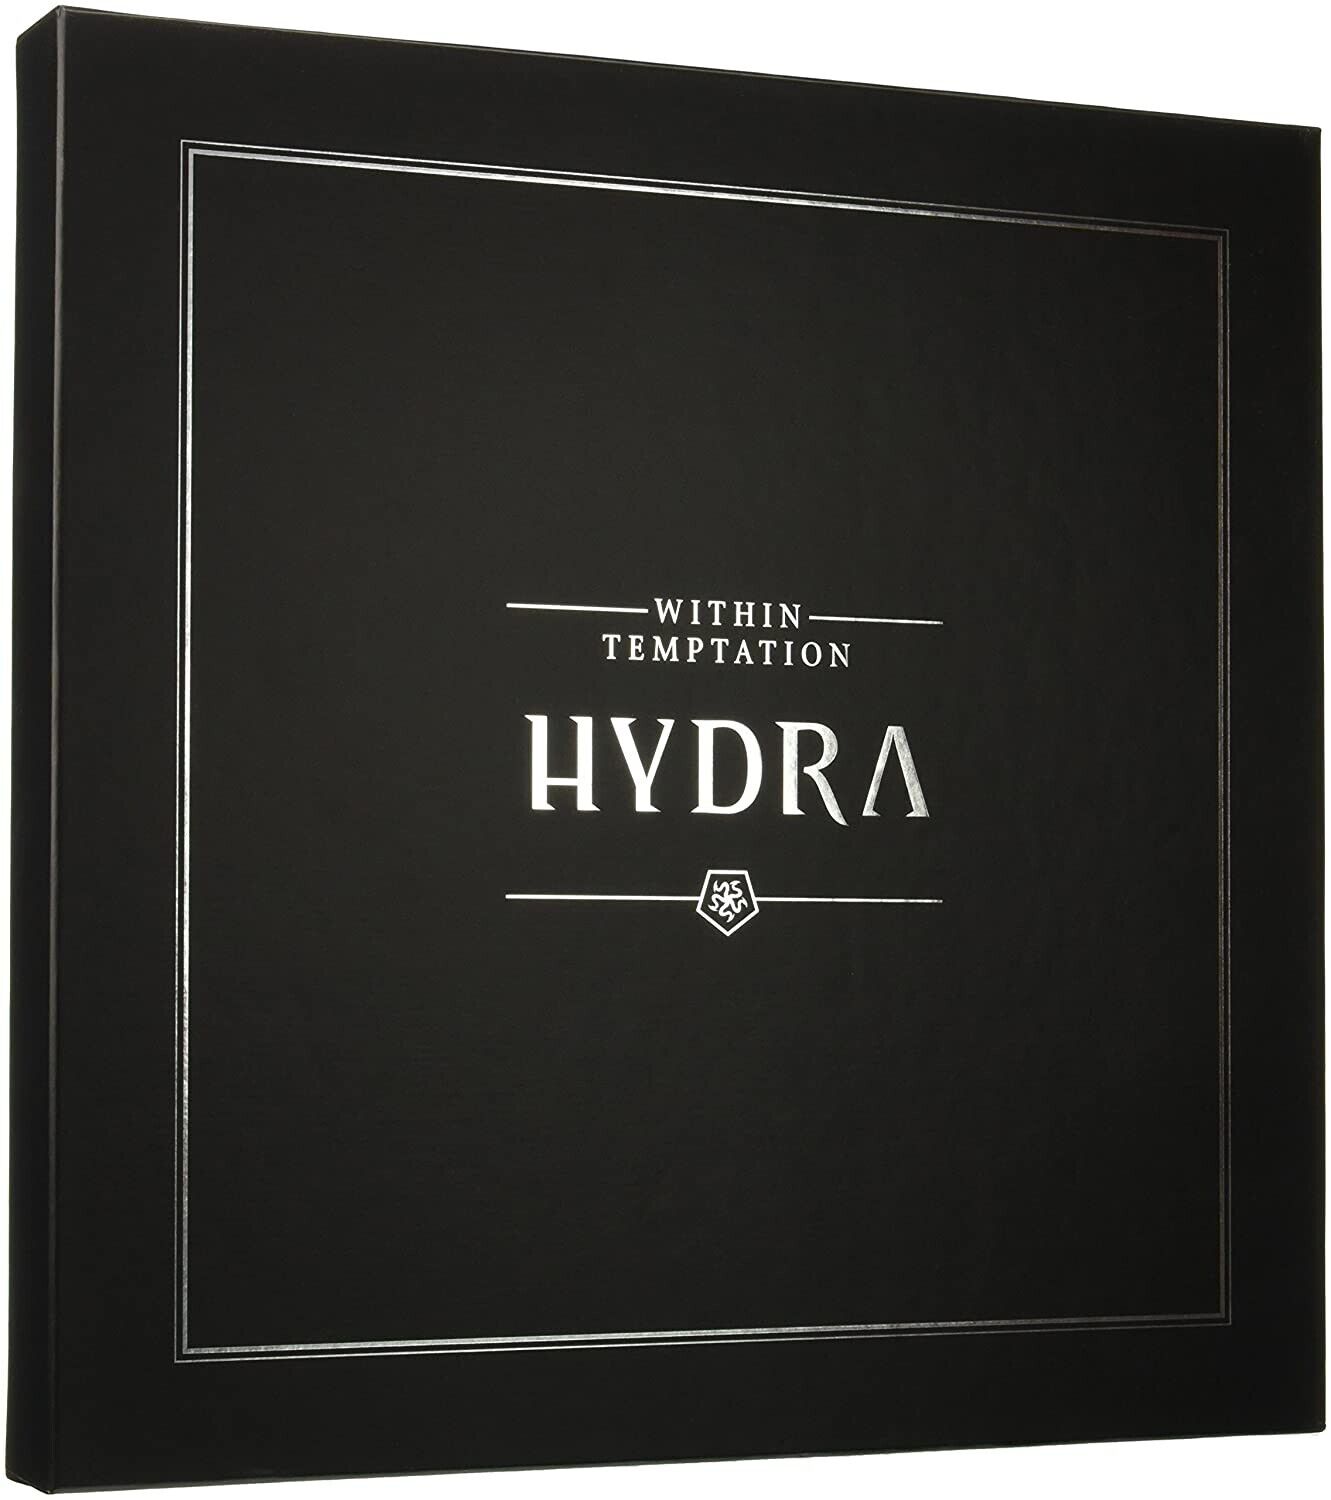 Hydra (Limited Deluxe Edition Box-Set)